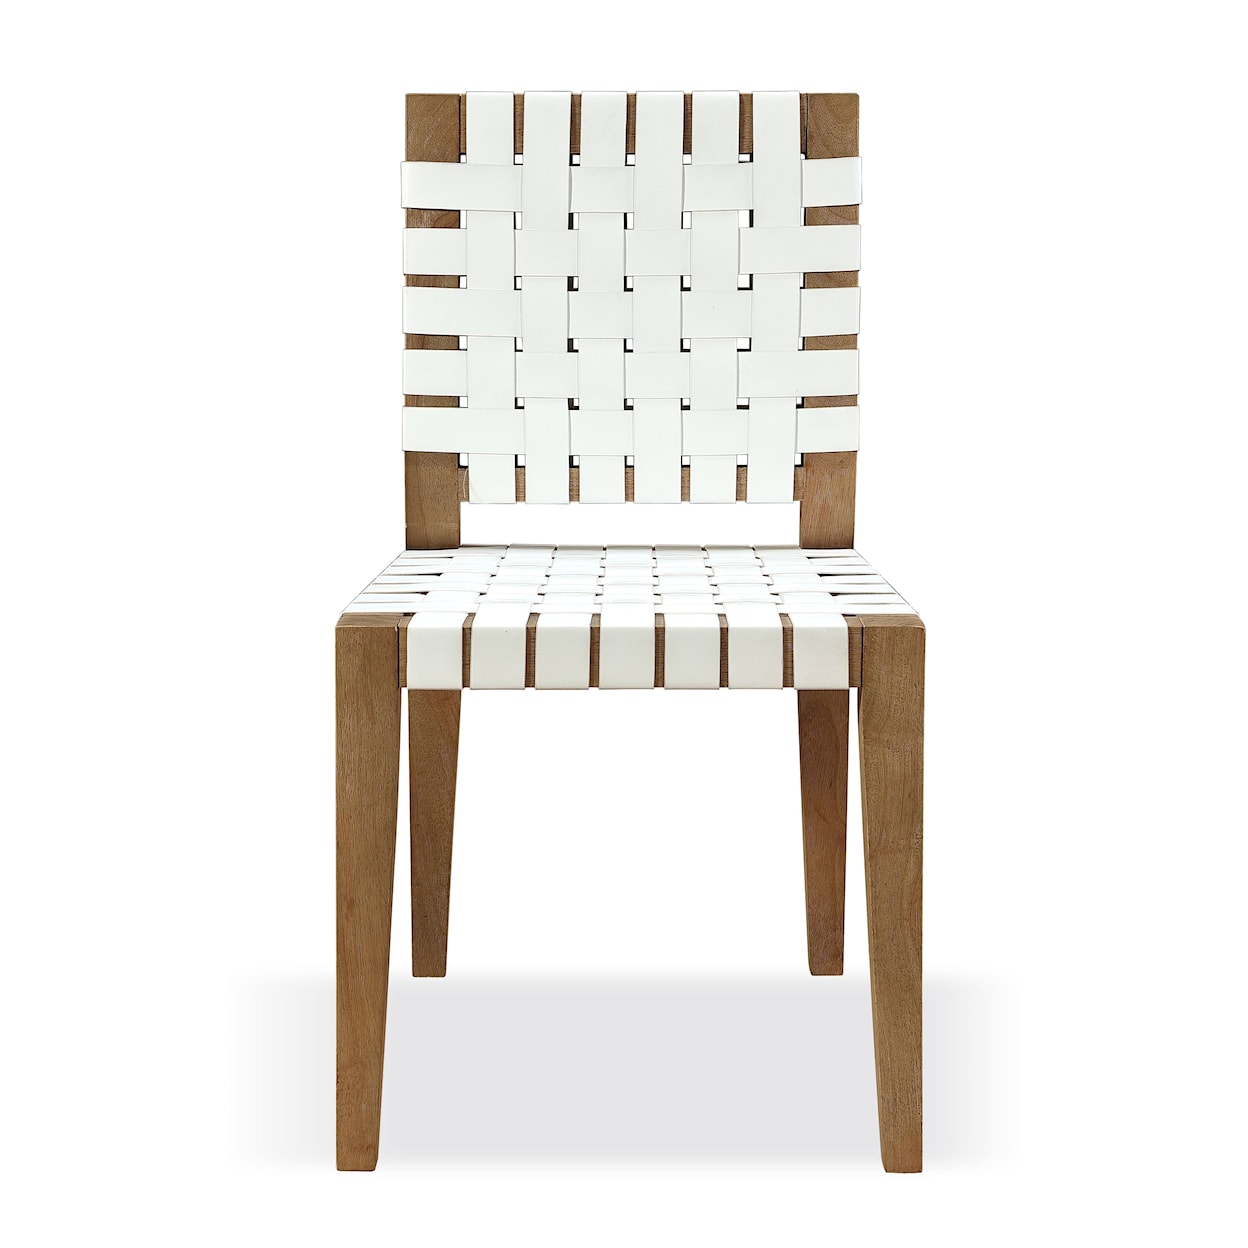 Modus International One Side Chair Woven - White/Bisque